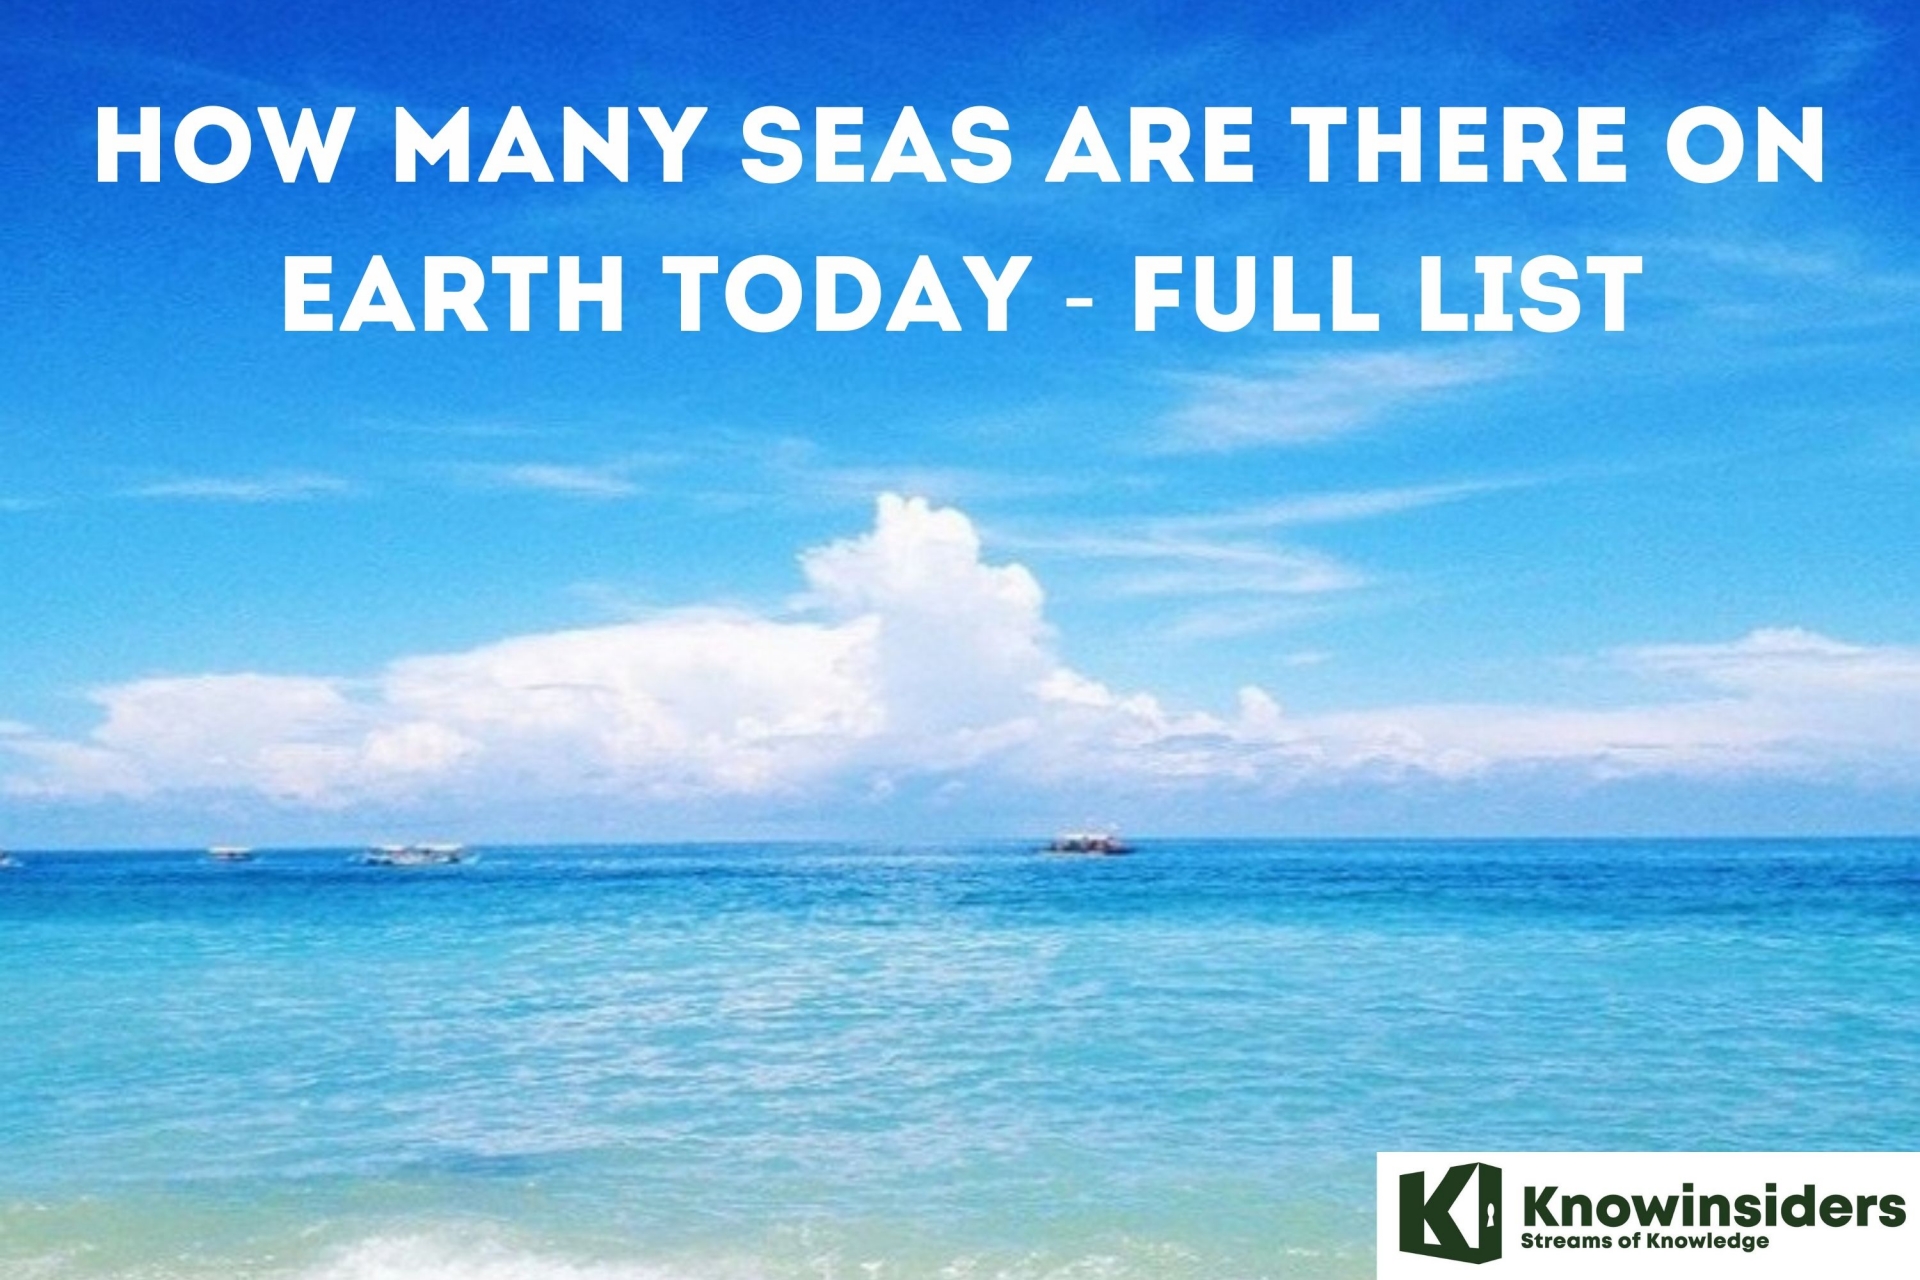 How Many Seas Are There on Earth Today: Full List, Top Largest and Smallest Seas